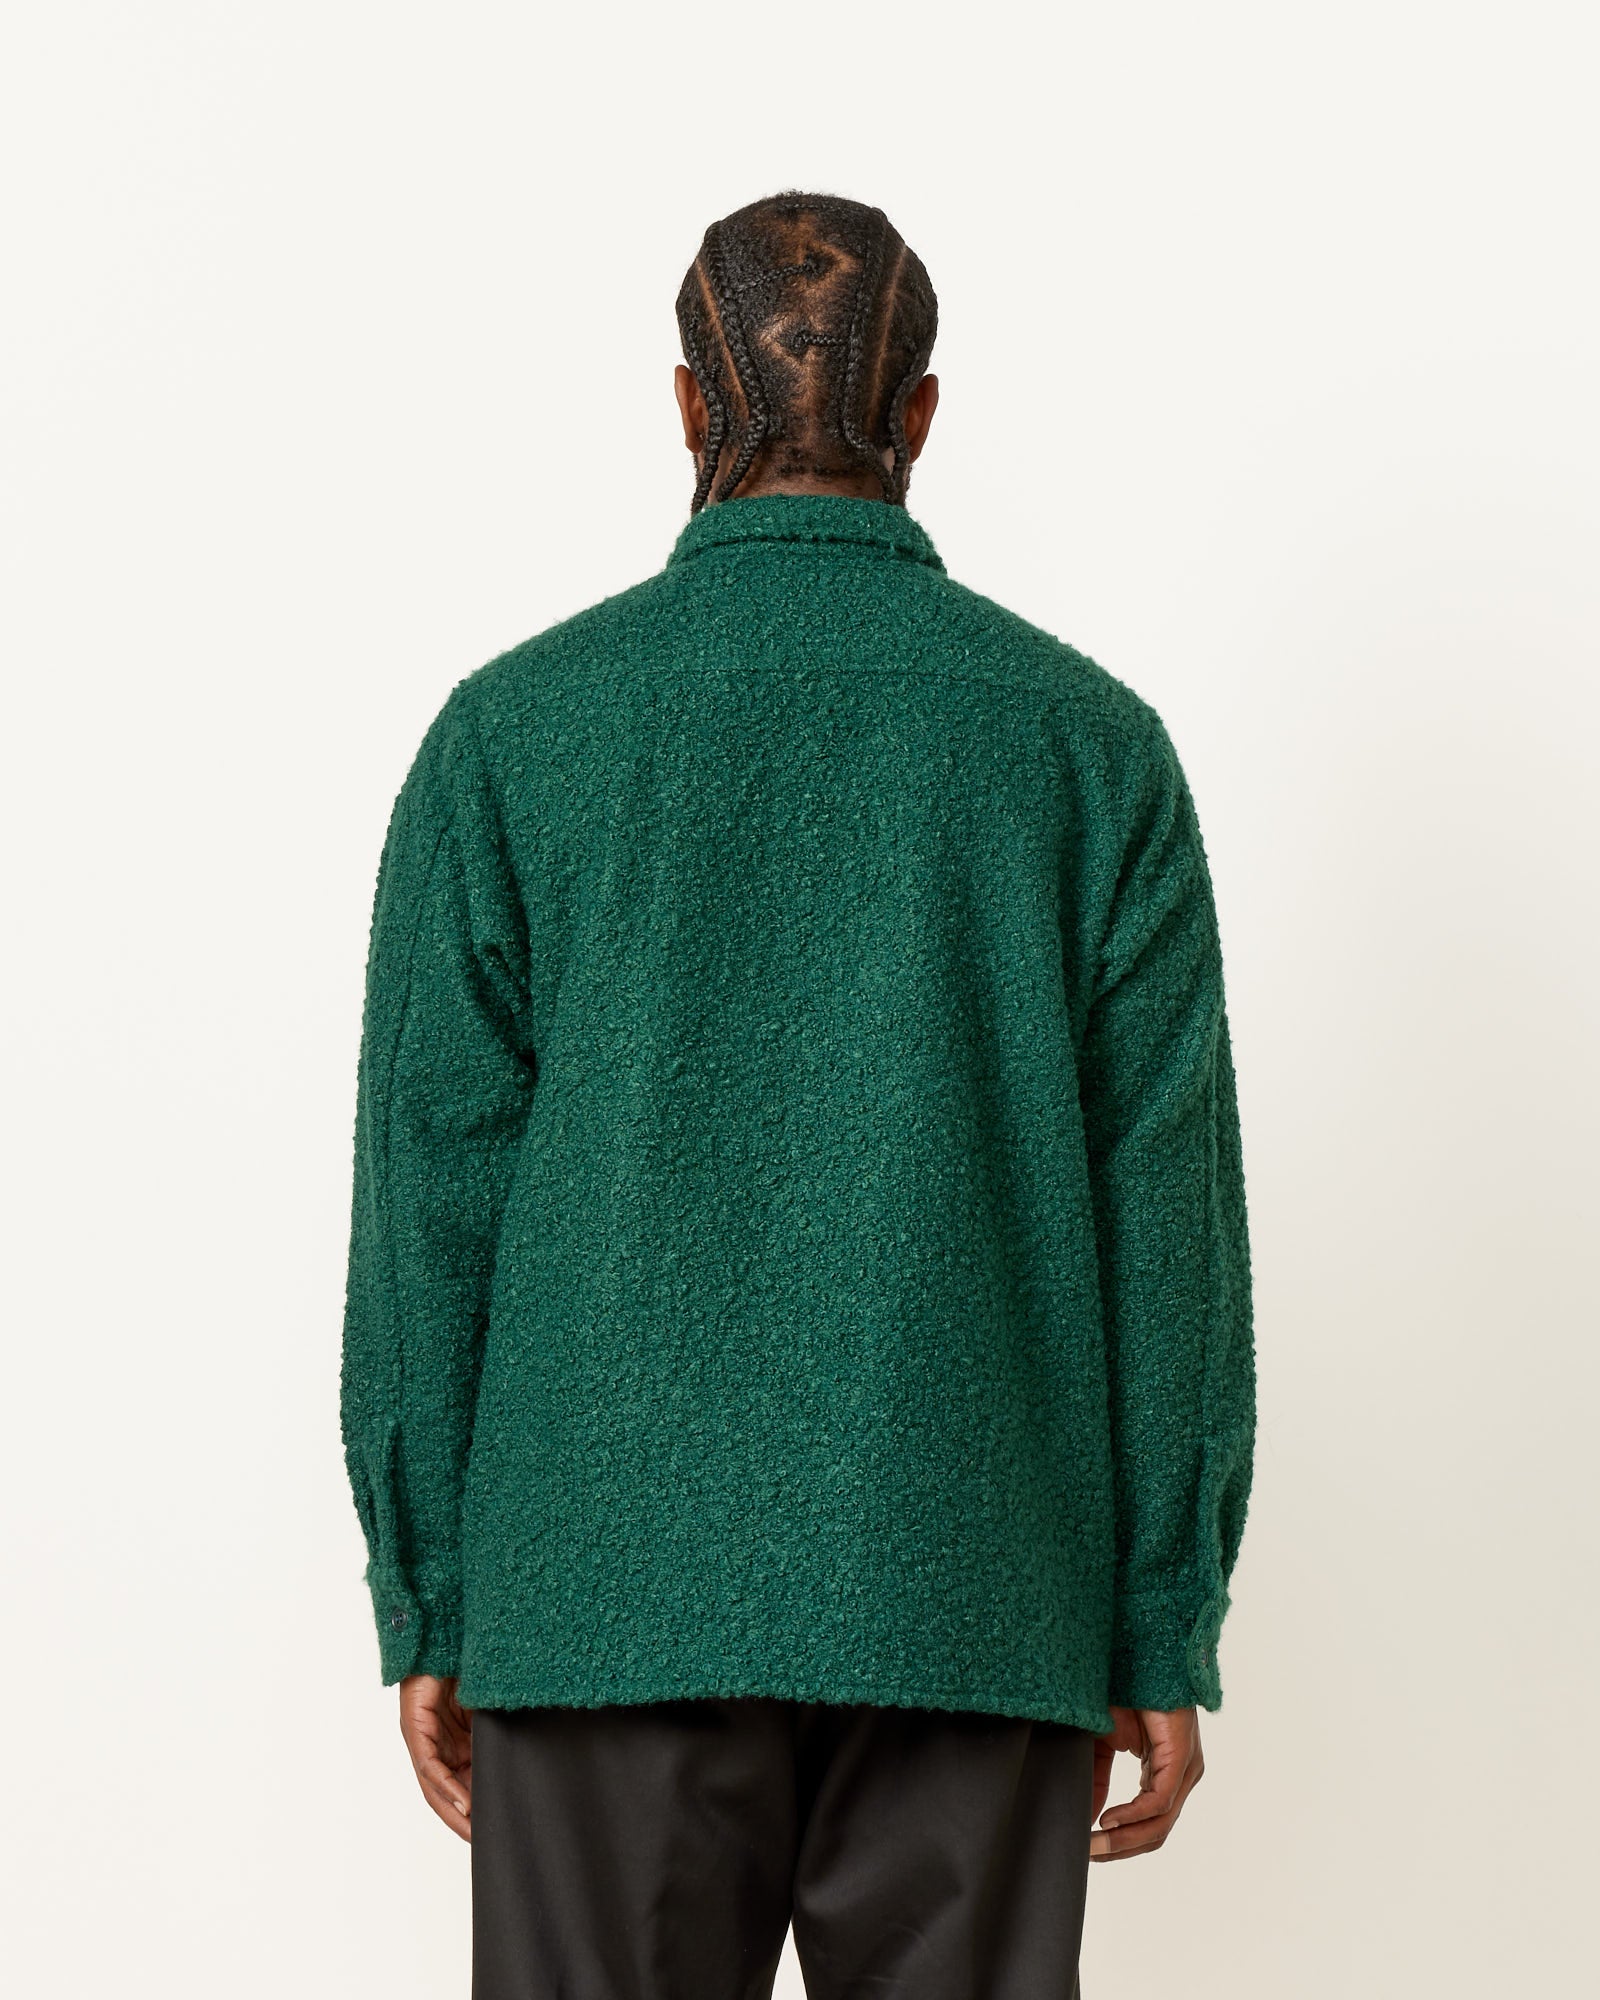 Porto Shirt Long Sleeve in Sherpa Forest